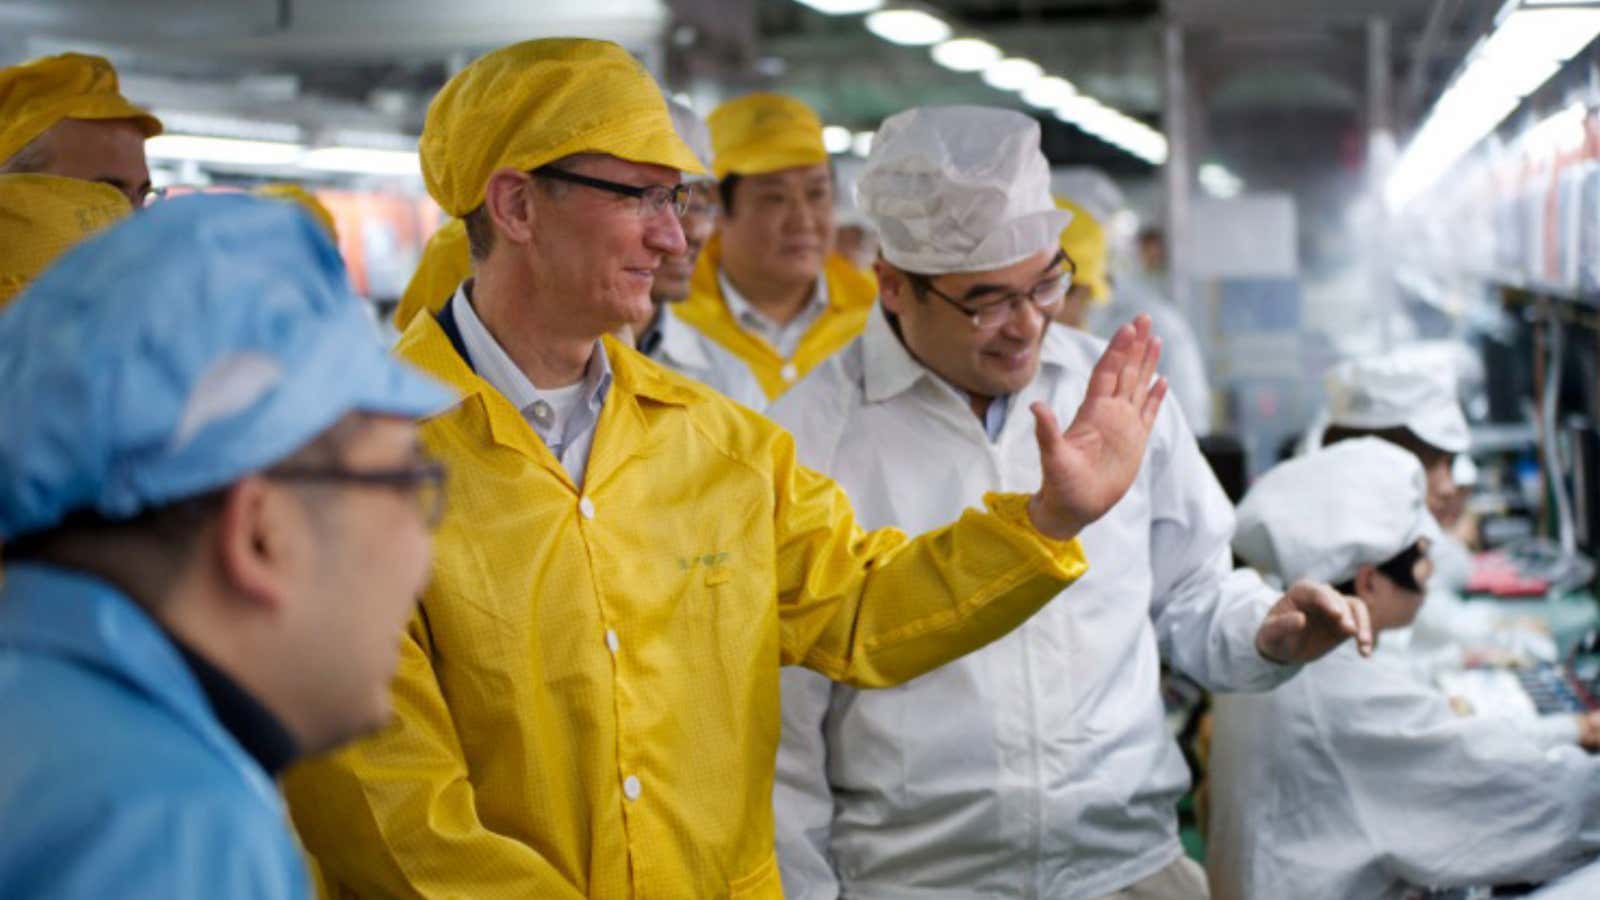 Tim Cook watches the (subsidized?) iPhone sausages getting made.